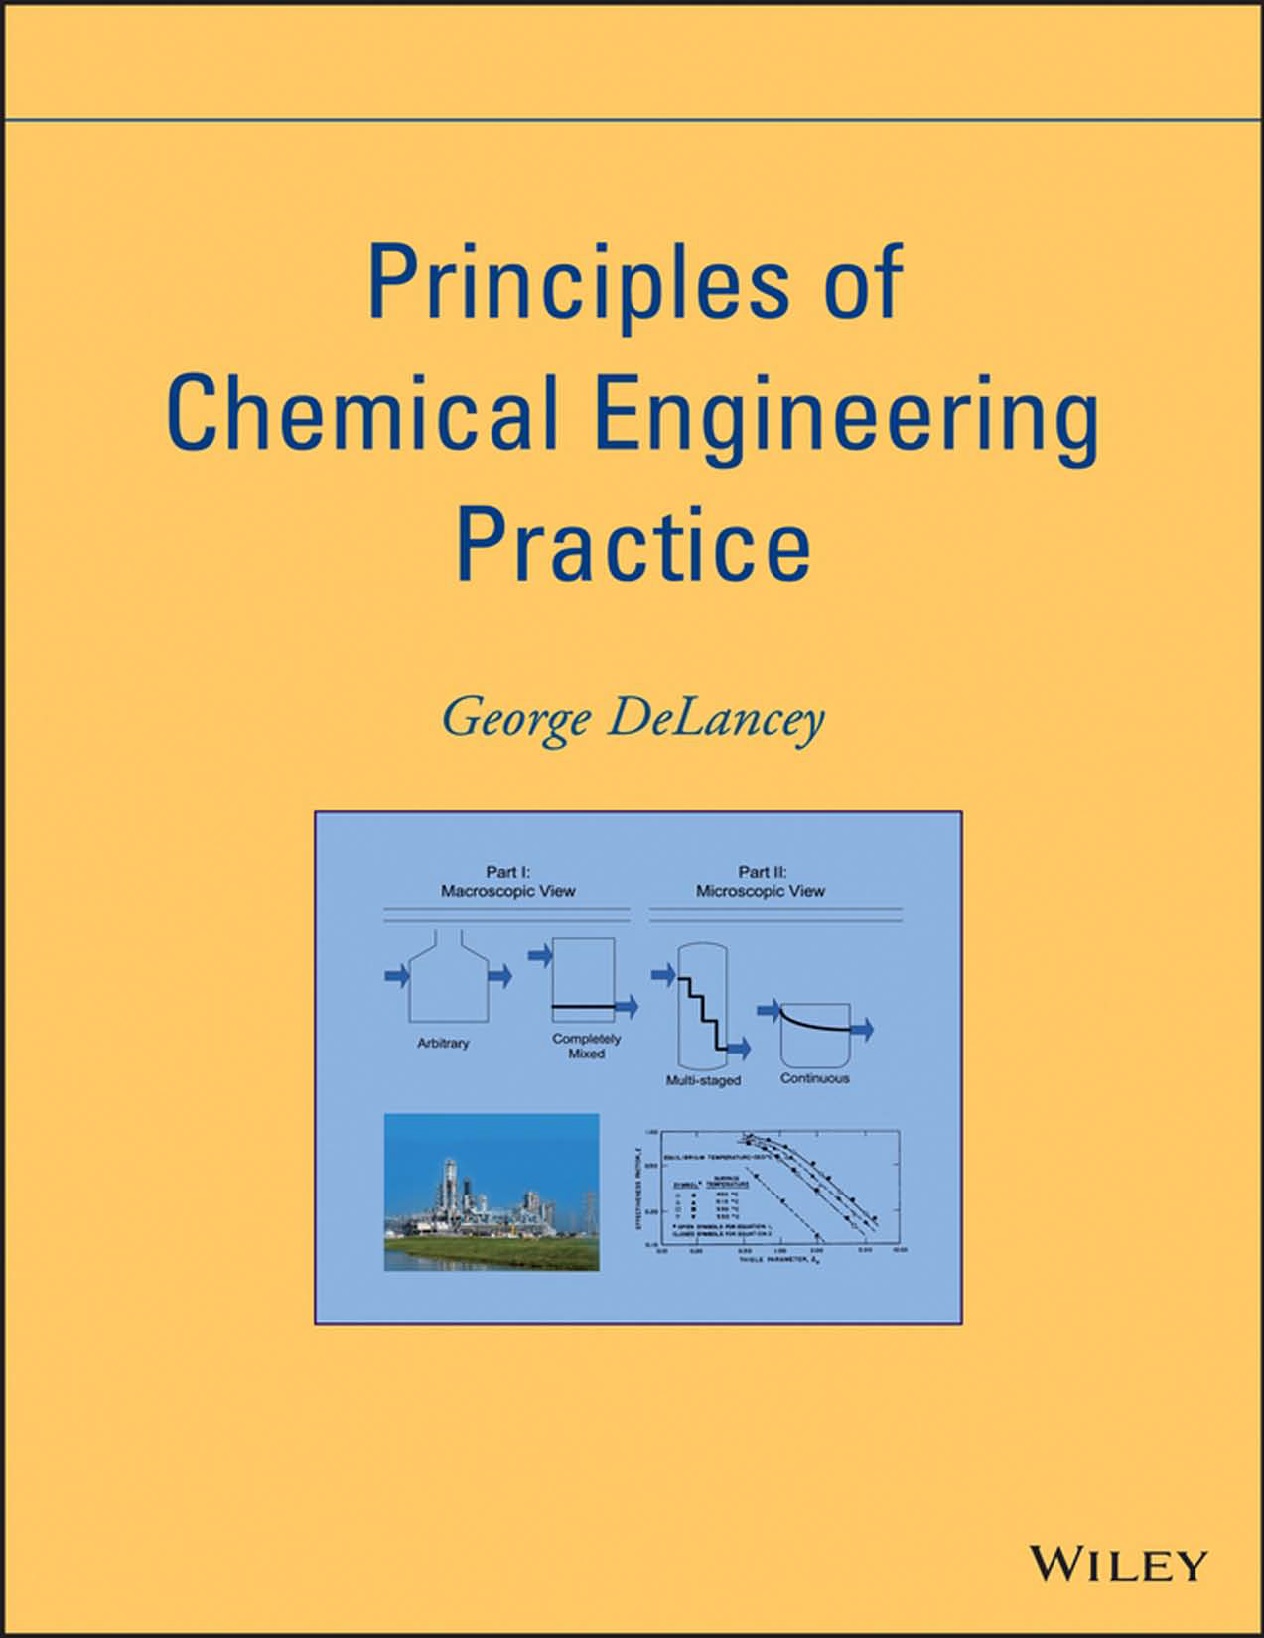 engineering-library-ebooks-principles-of-chemical-engineering-practice-1st-edition